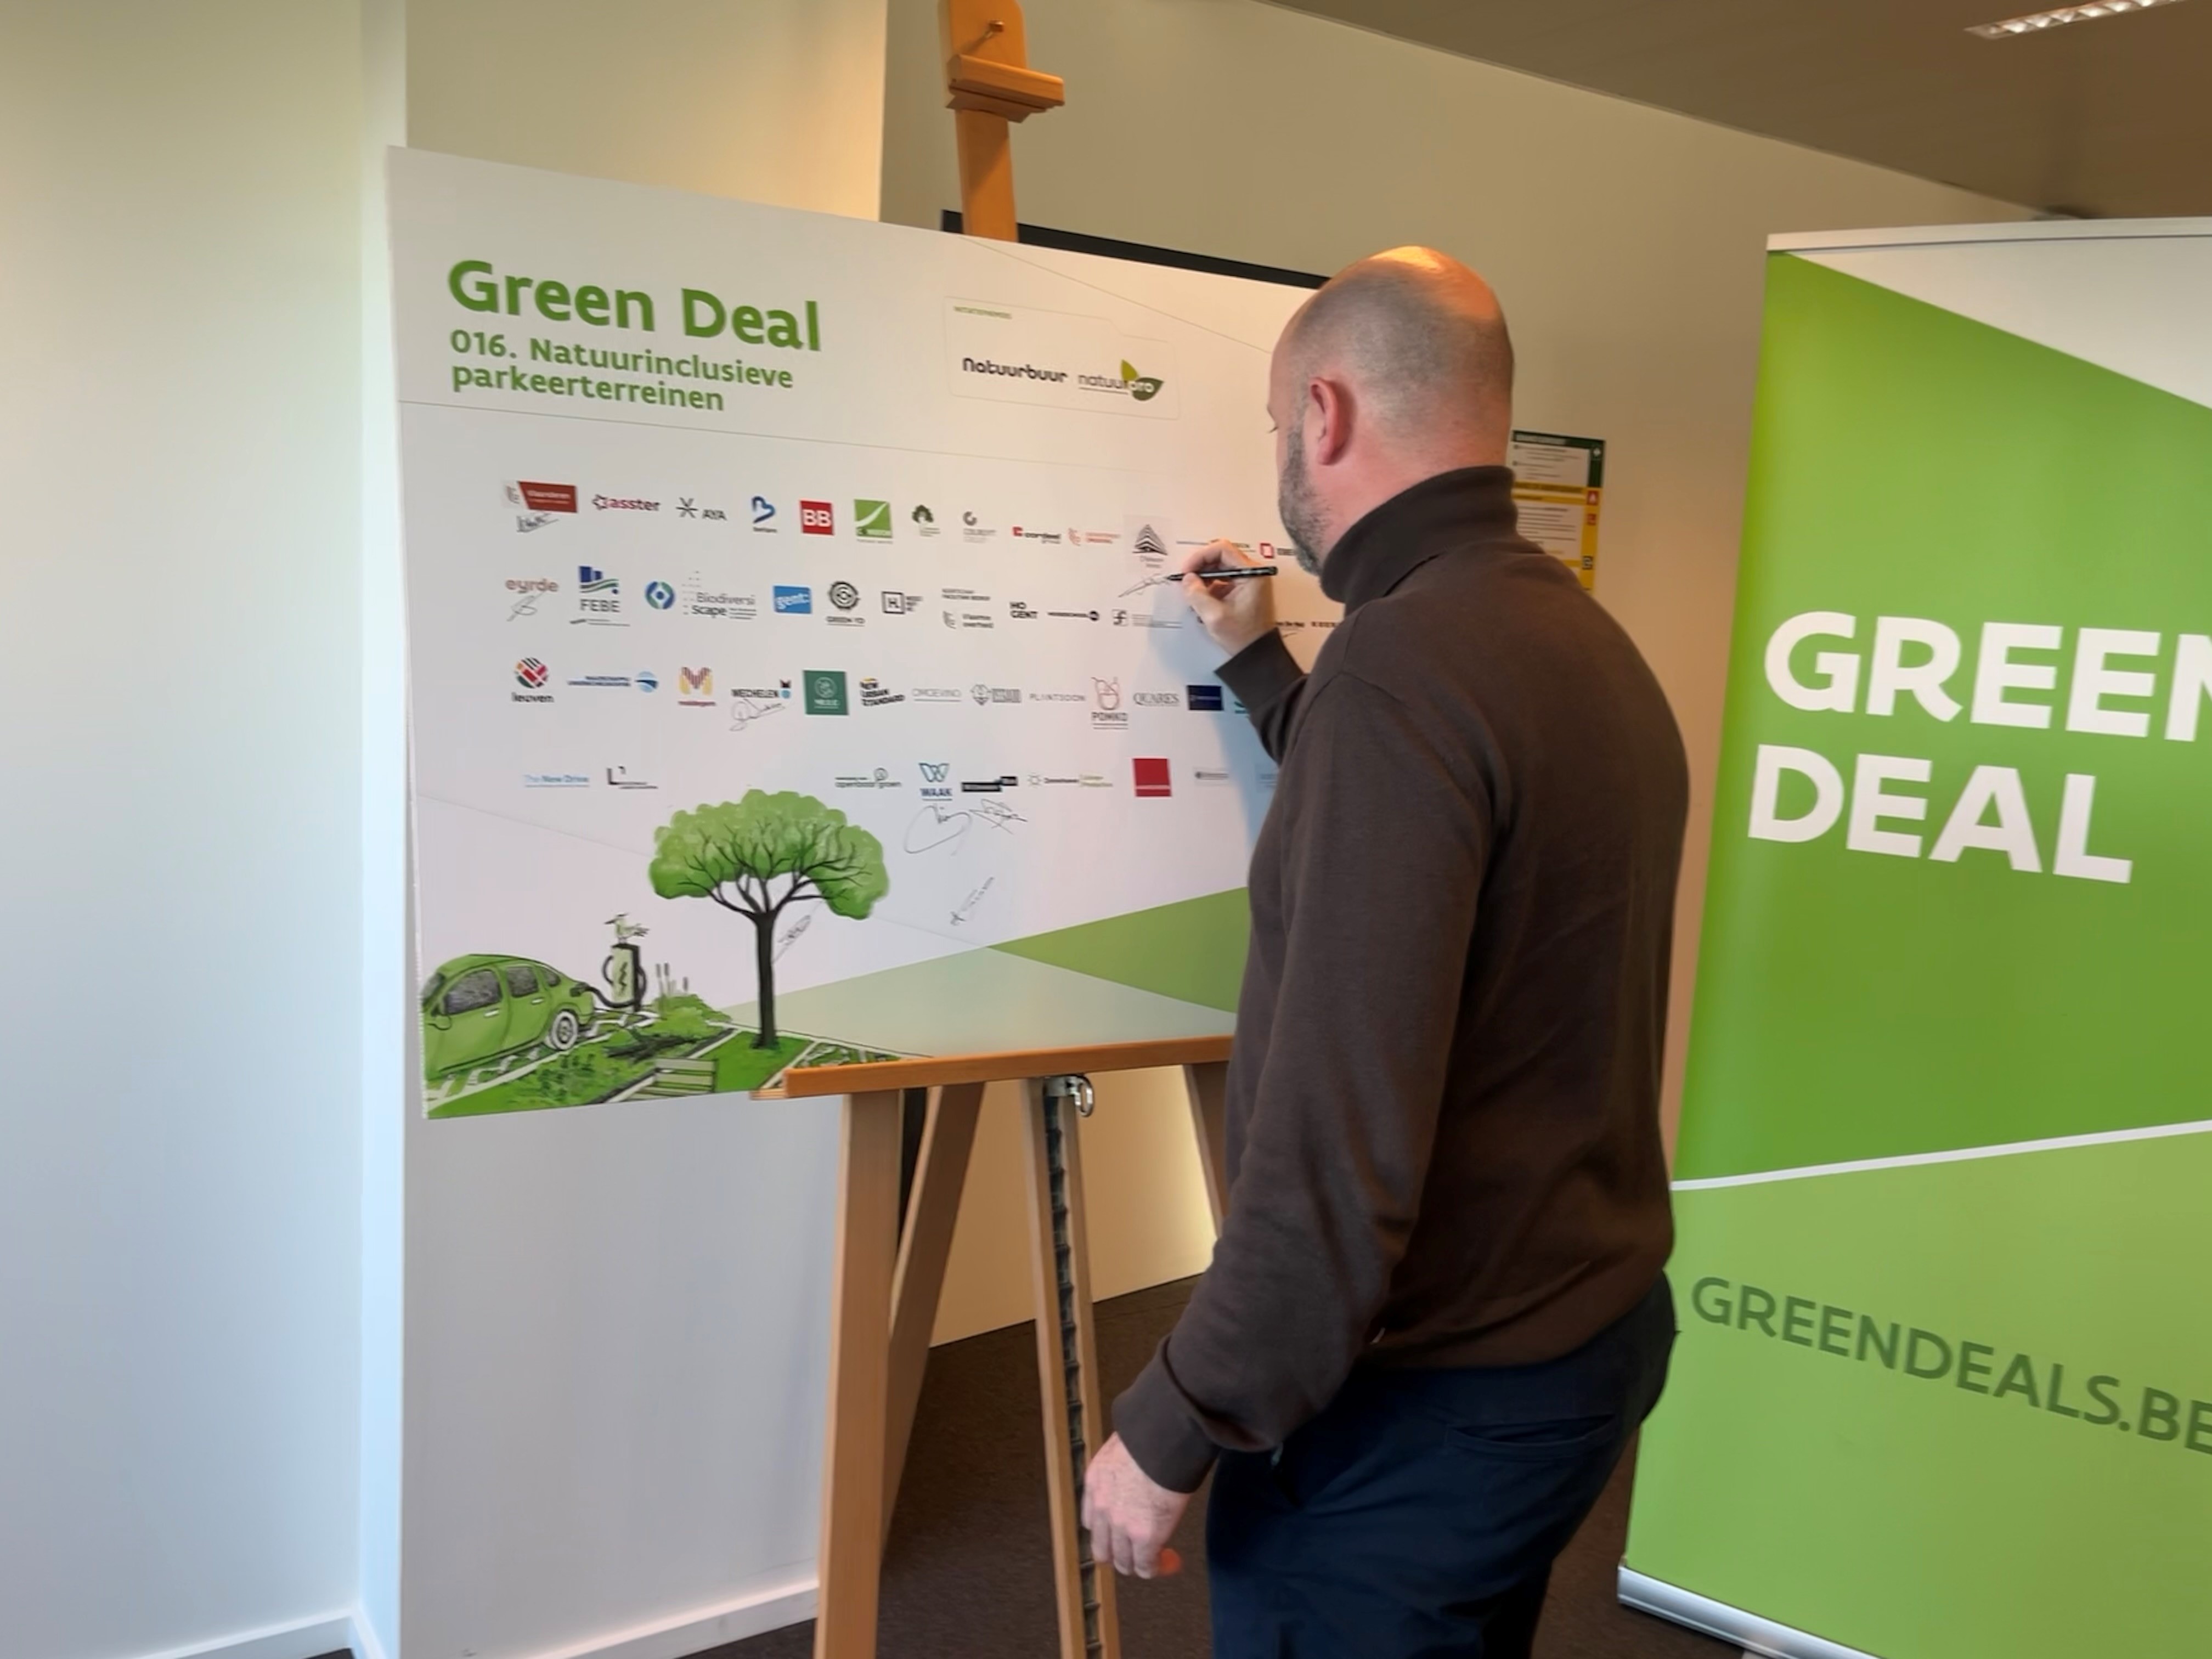 <p>As a logical sequence to the previous Green Deal "Biodiversity and Business", we are now joining the new Green Deal. There are still a lot of car parks on our sites and these represent a great opportunity to work with biodiversity.</p>